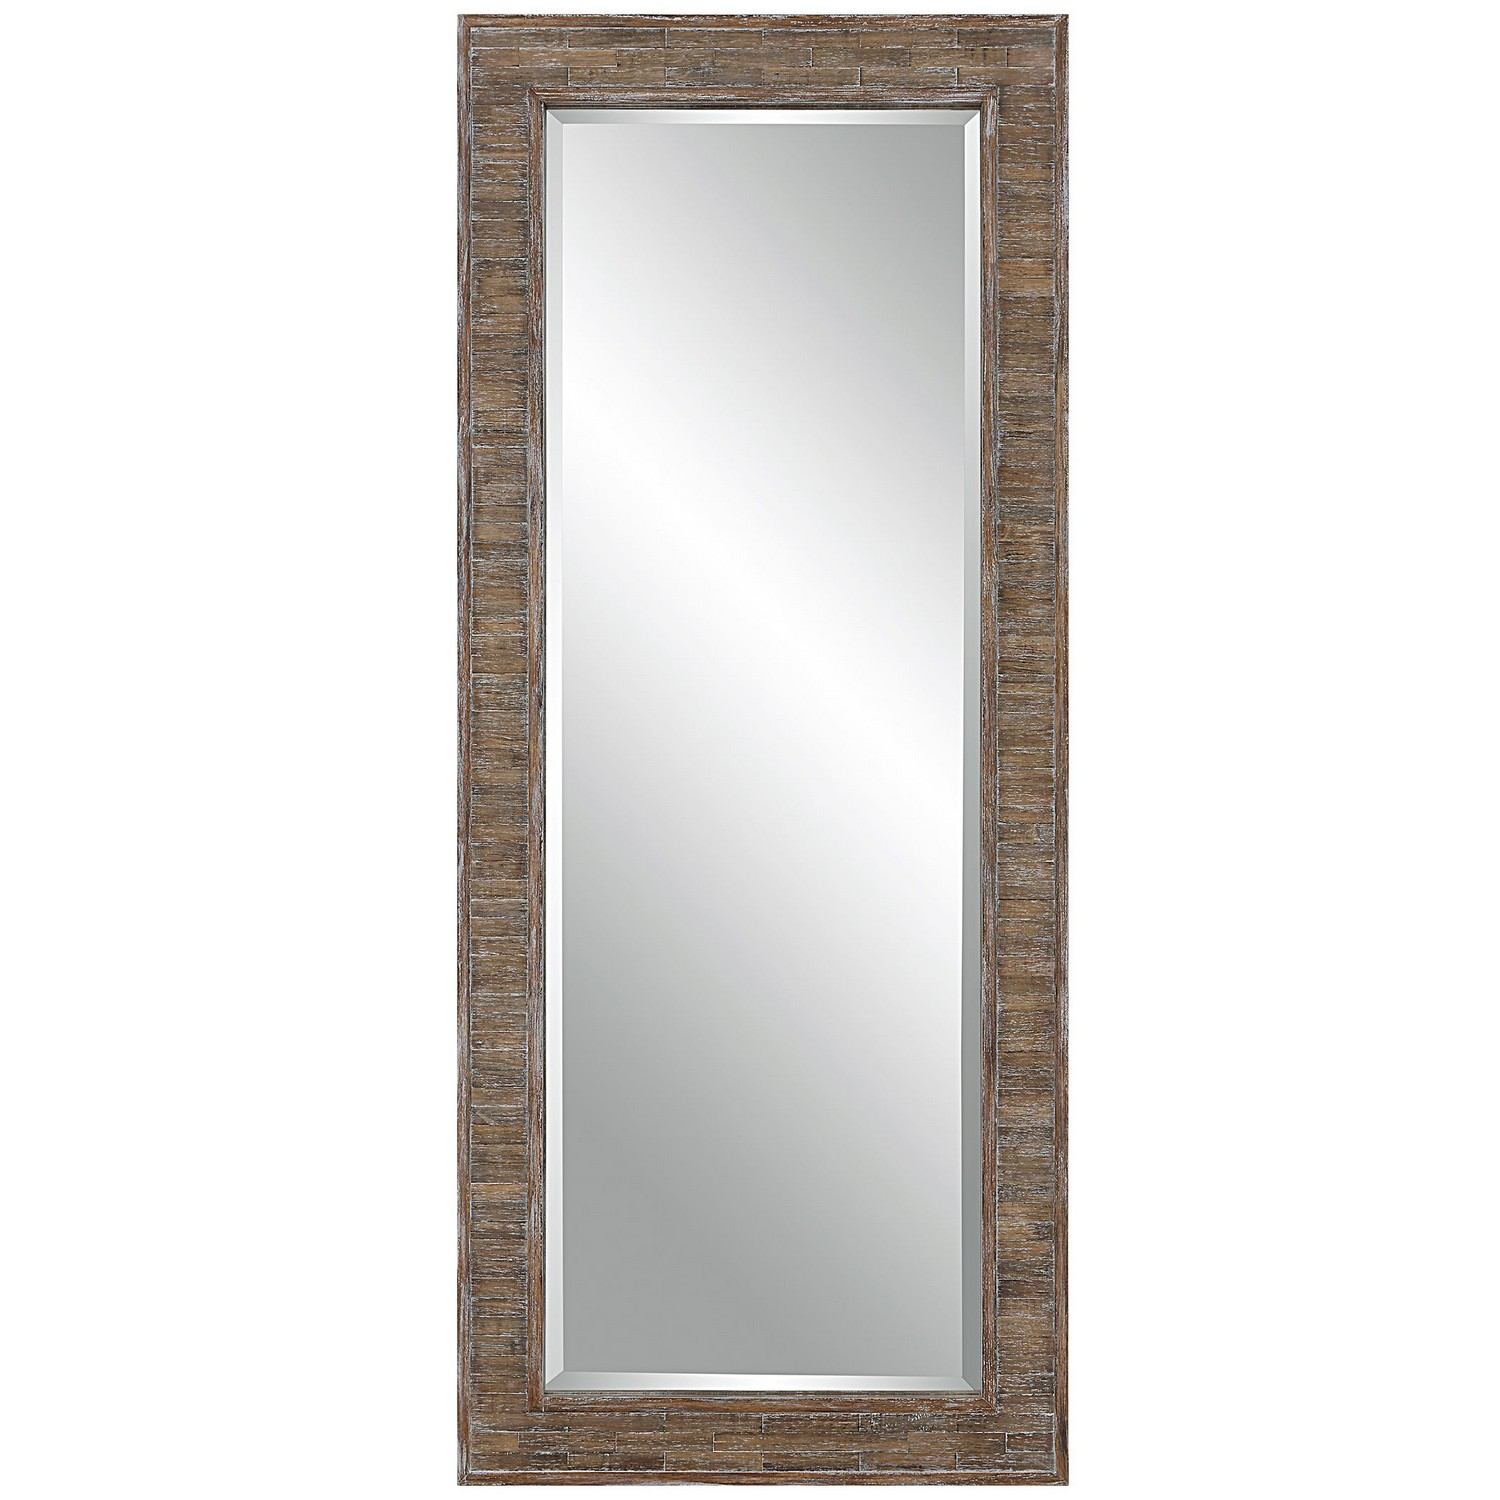 ABC Accent ABC-00554 Mirror - Weathered Pine